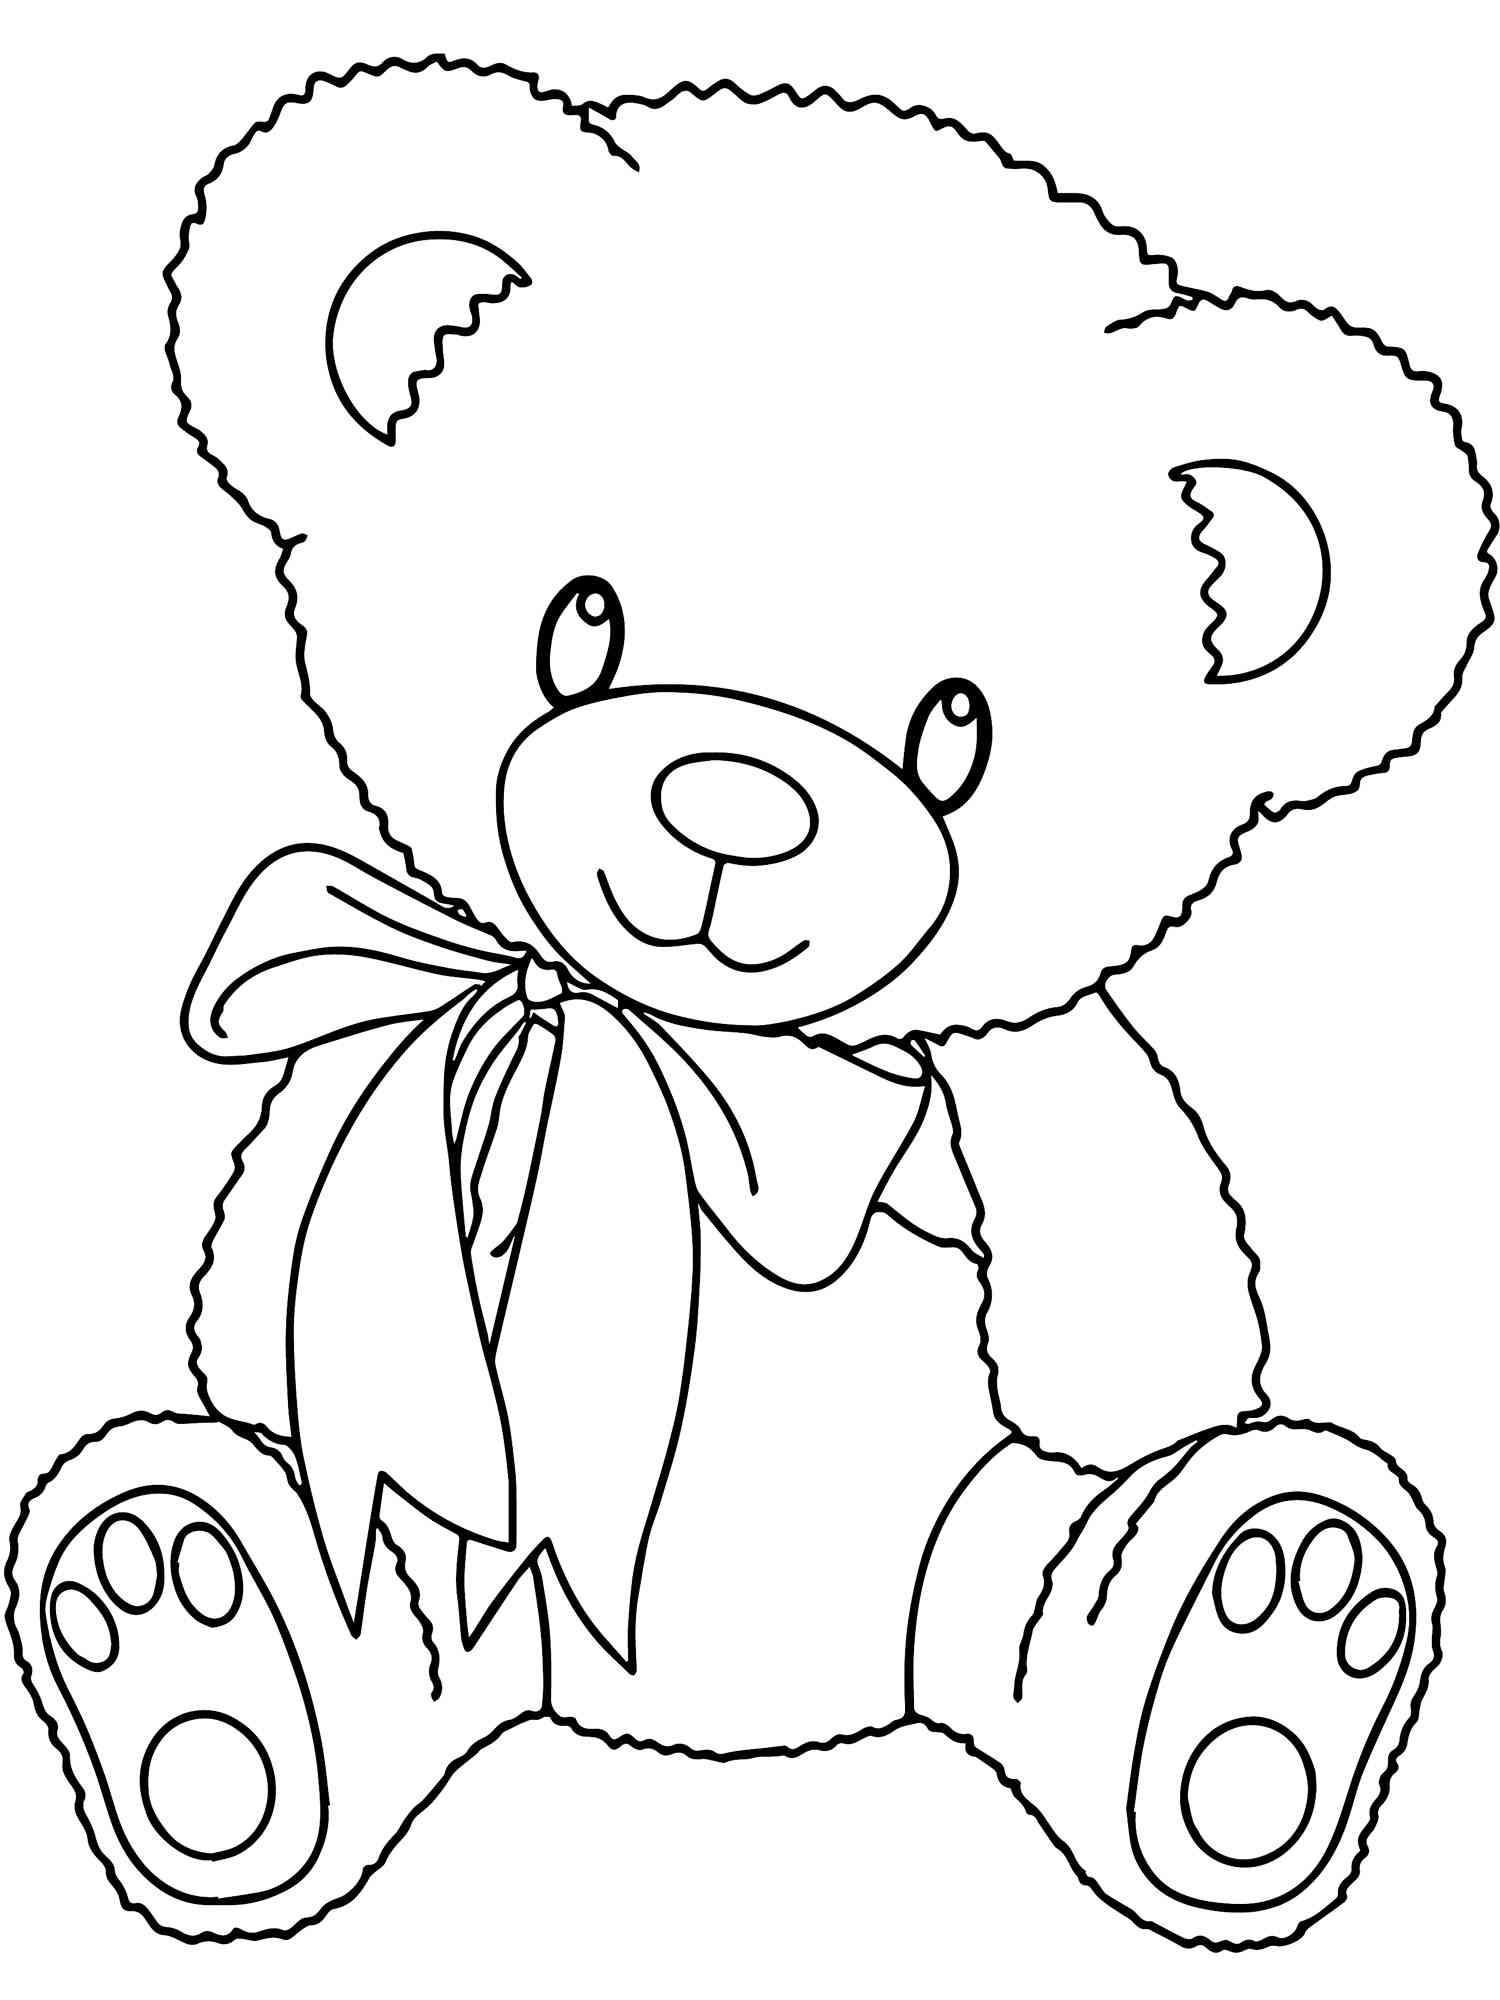 Teddy bears coloring pages. Download and print Teddy bears ...